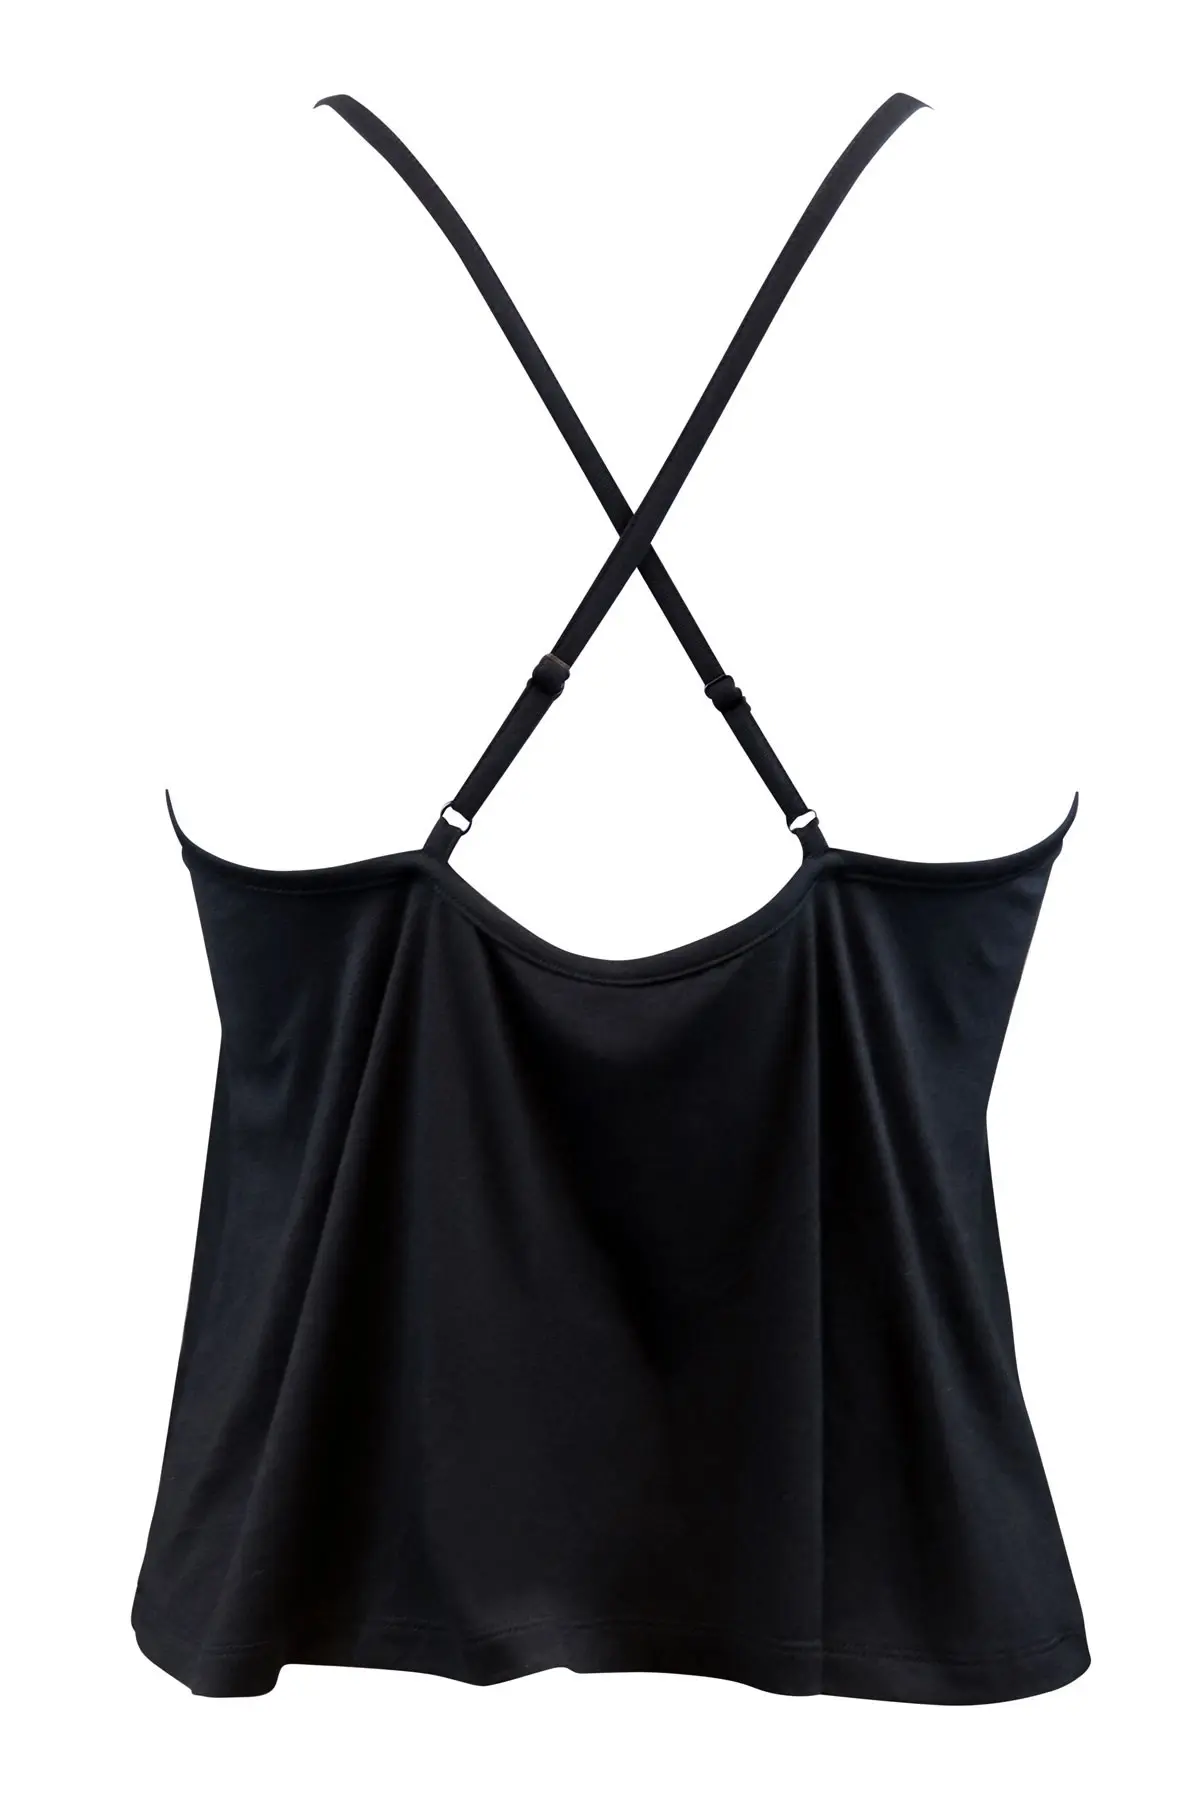 Sofa Love Cross Strapped Camisole | Pour Moi | Sofa Love Cross Strapped ...